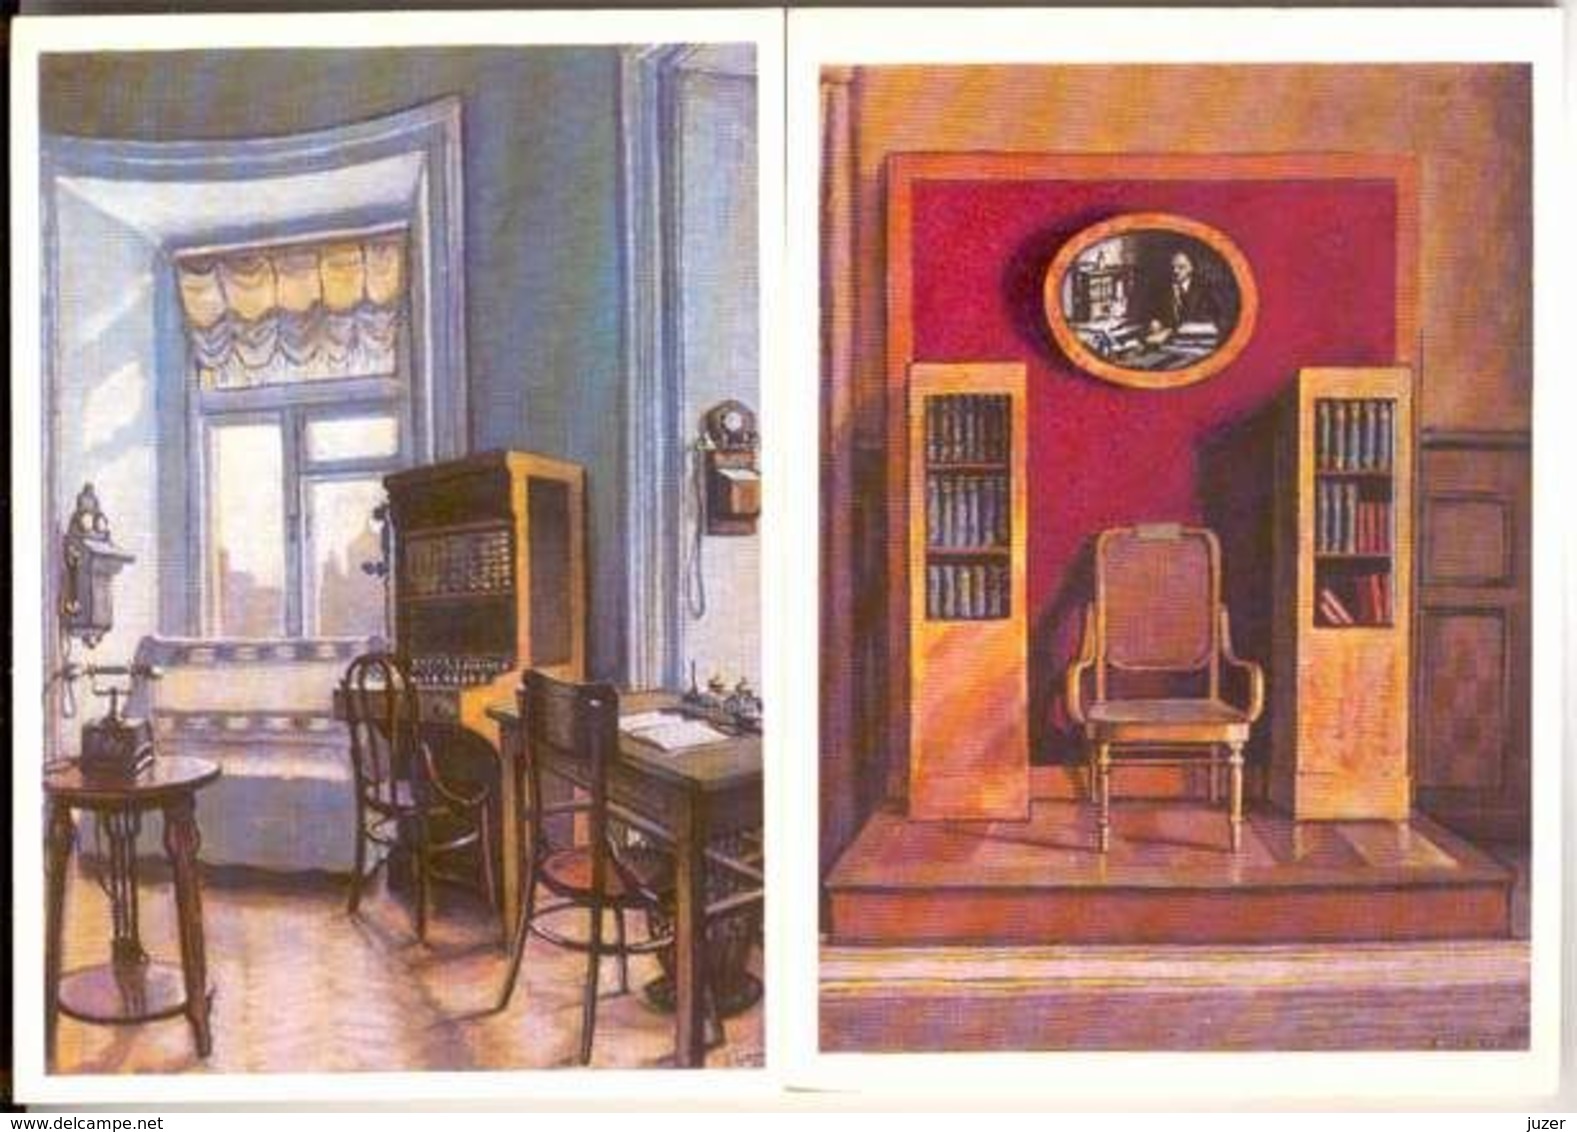 Russia, Moscow: Kremlin, Apartment of Lenin. 20 cards